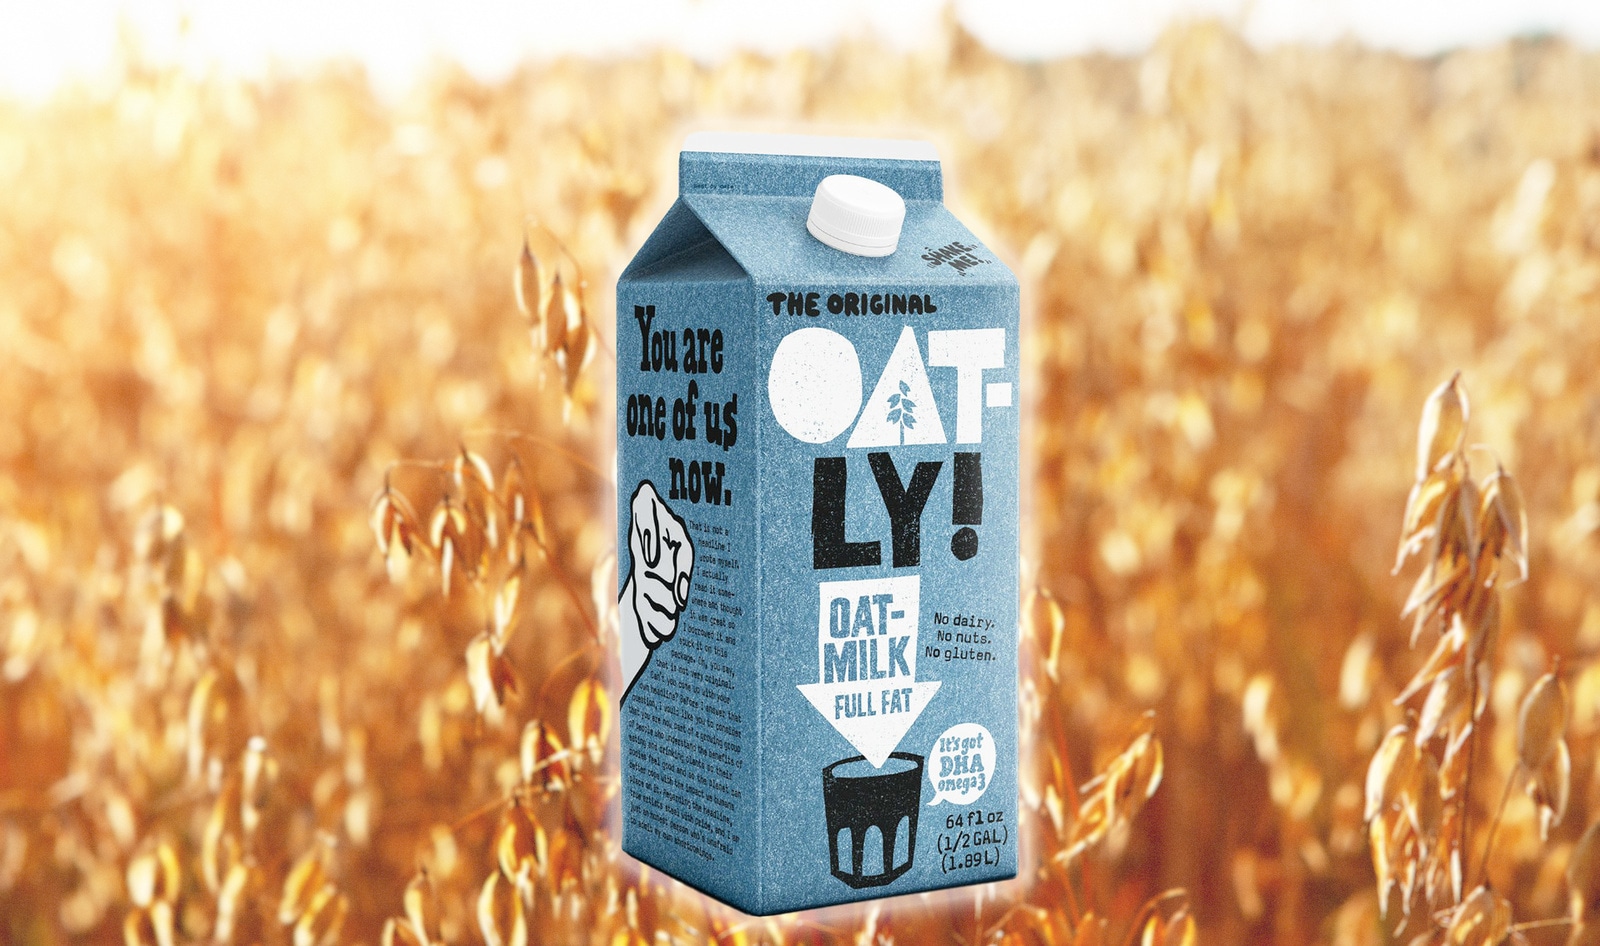 Oatly’s First UK Factory to Produce 300 Million Liters of Dairy-Free Milk Per Year